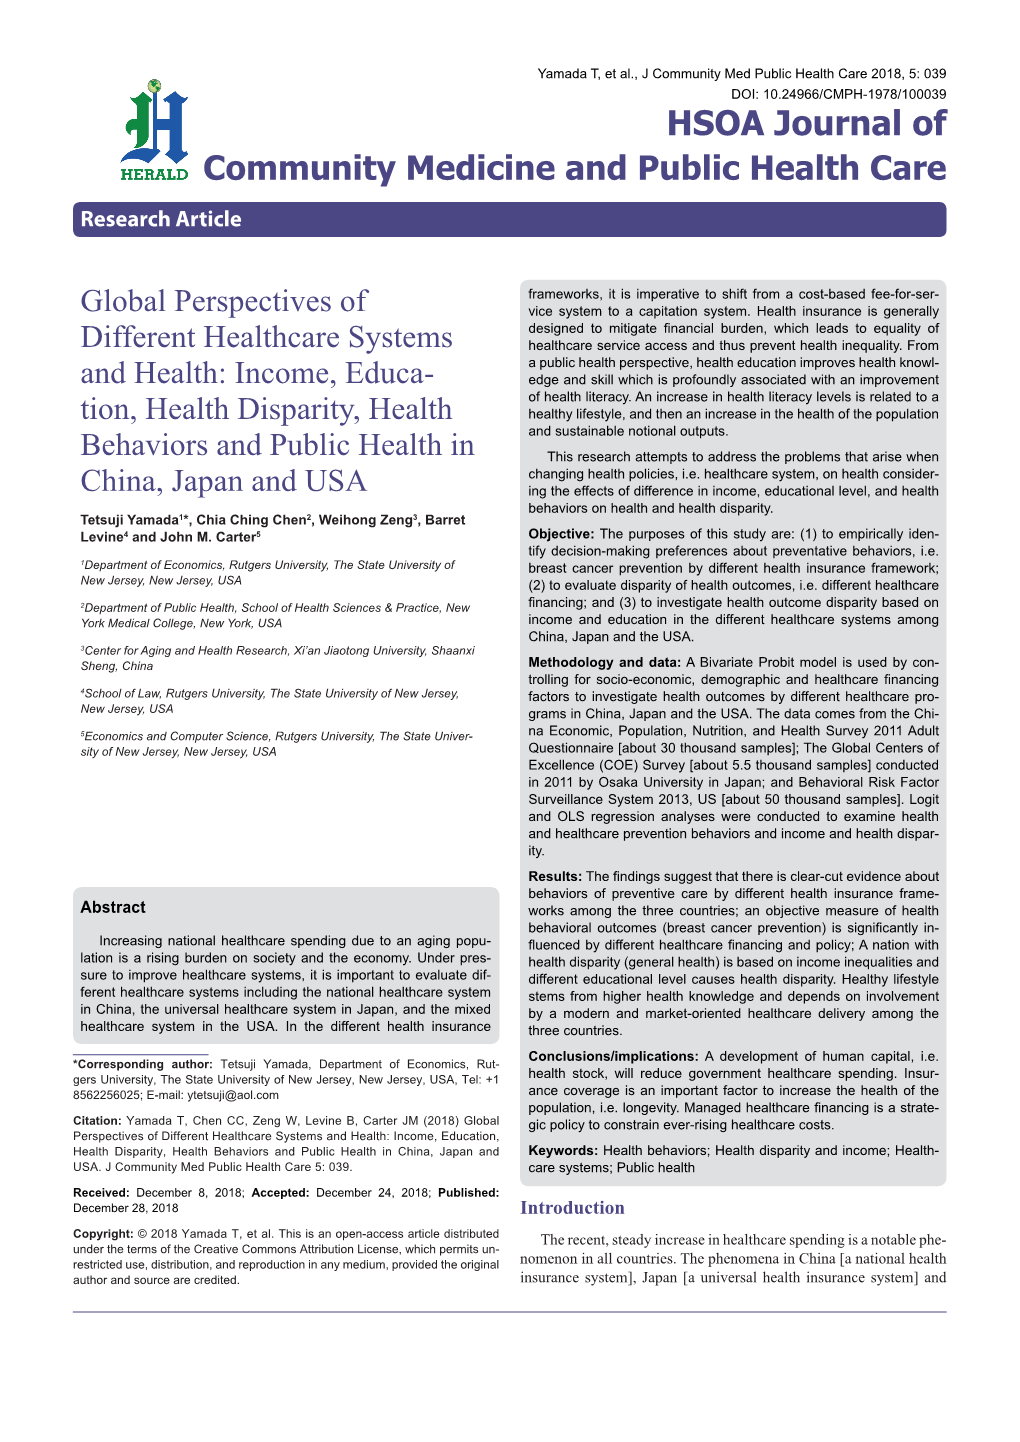 Global Perspectives of Different Healthcare Systems and Health: Income, Educa- Tion, Health Disparity, Health Behaviors And